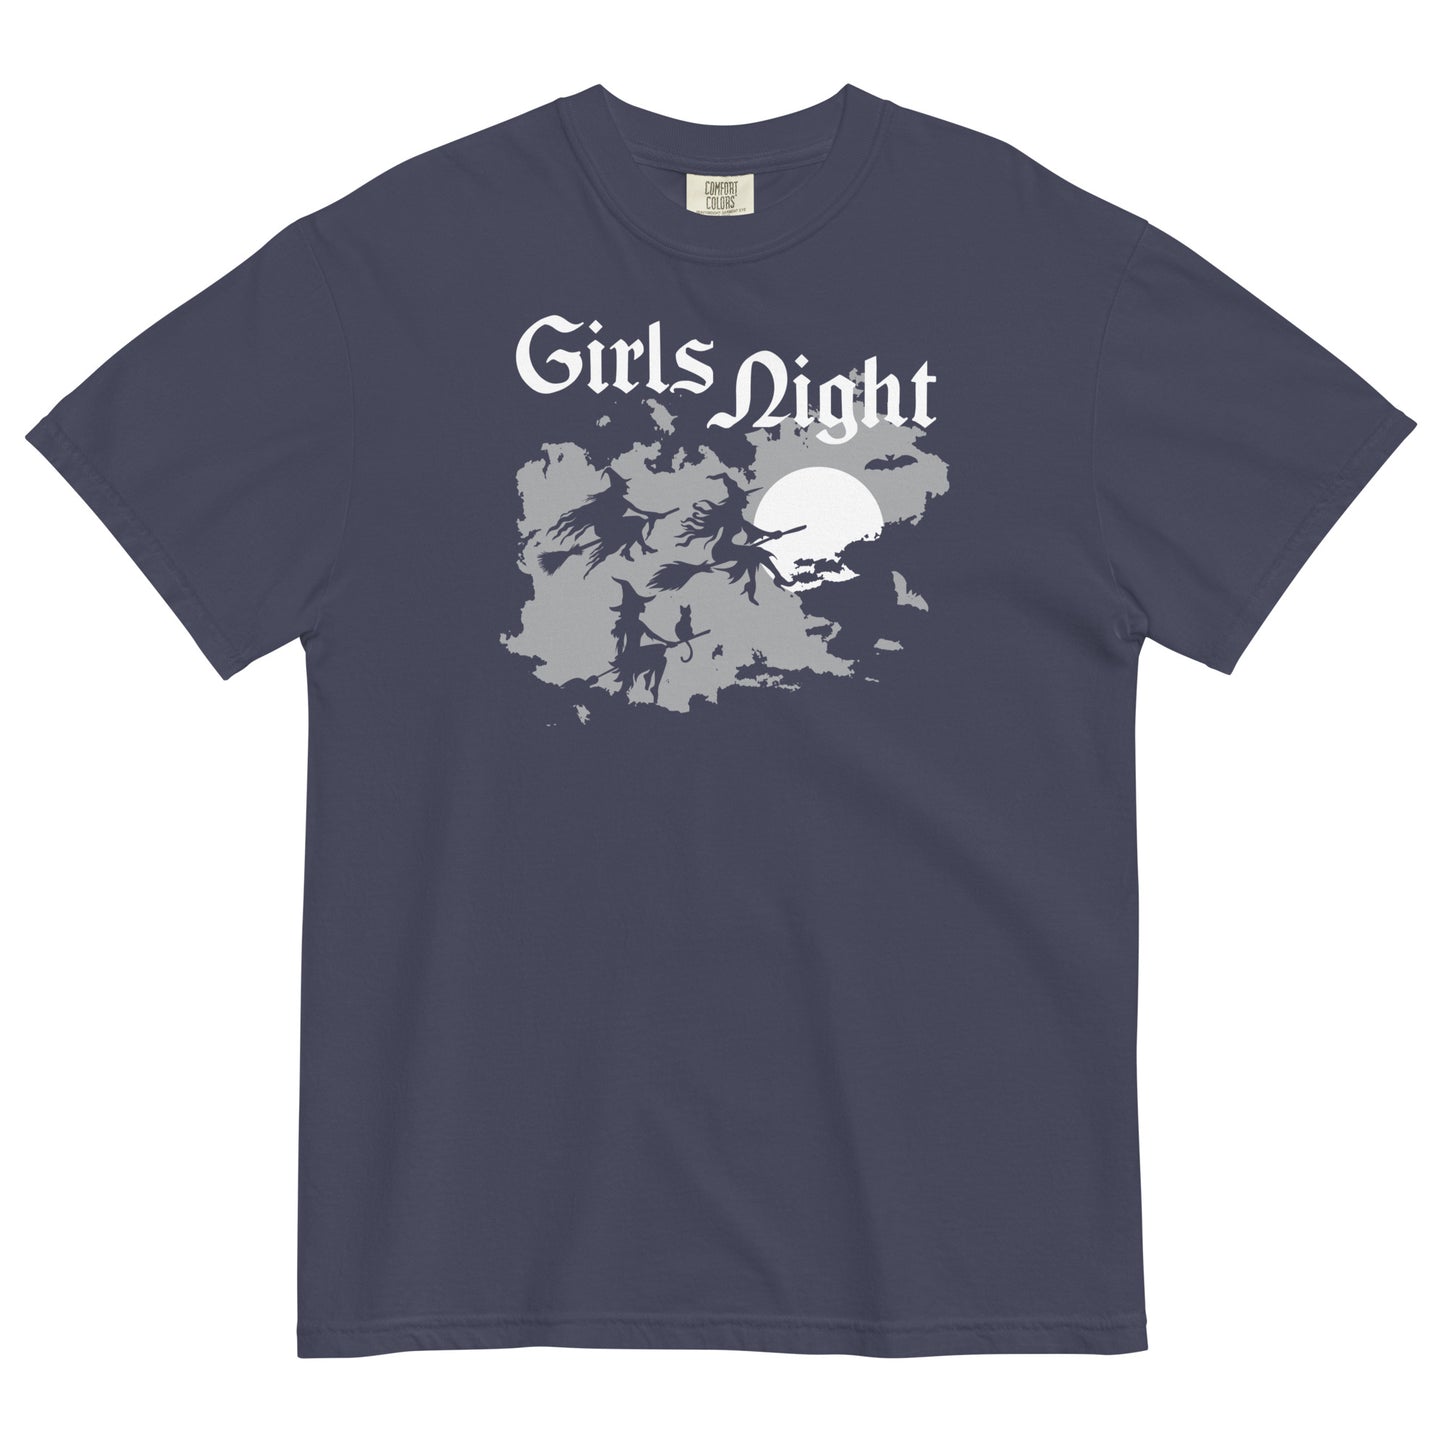 Girls Night Men's Relaxed Fit Tee